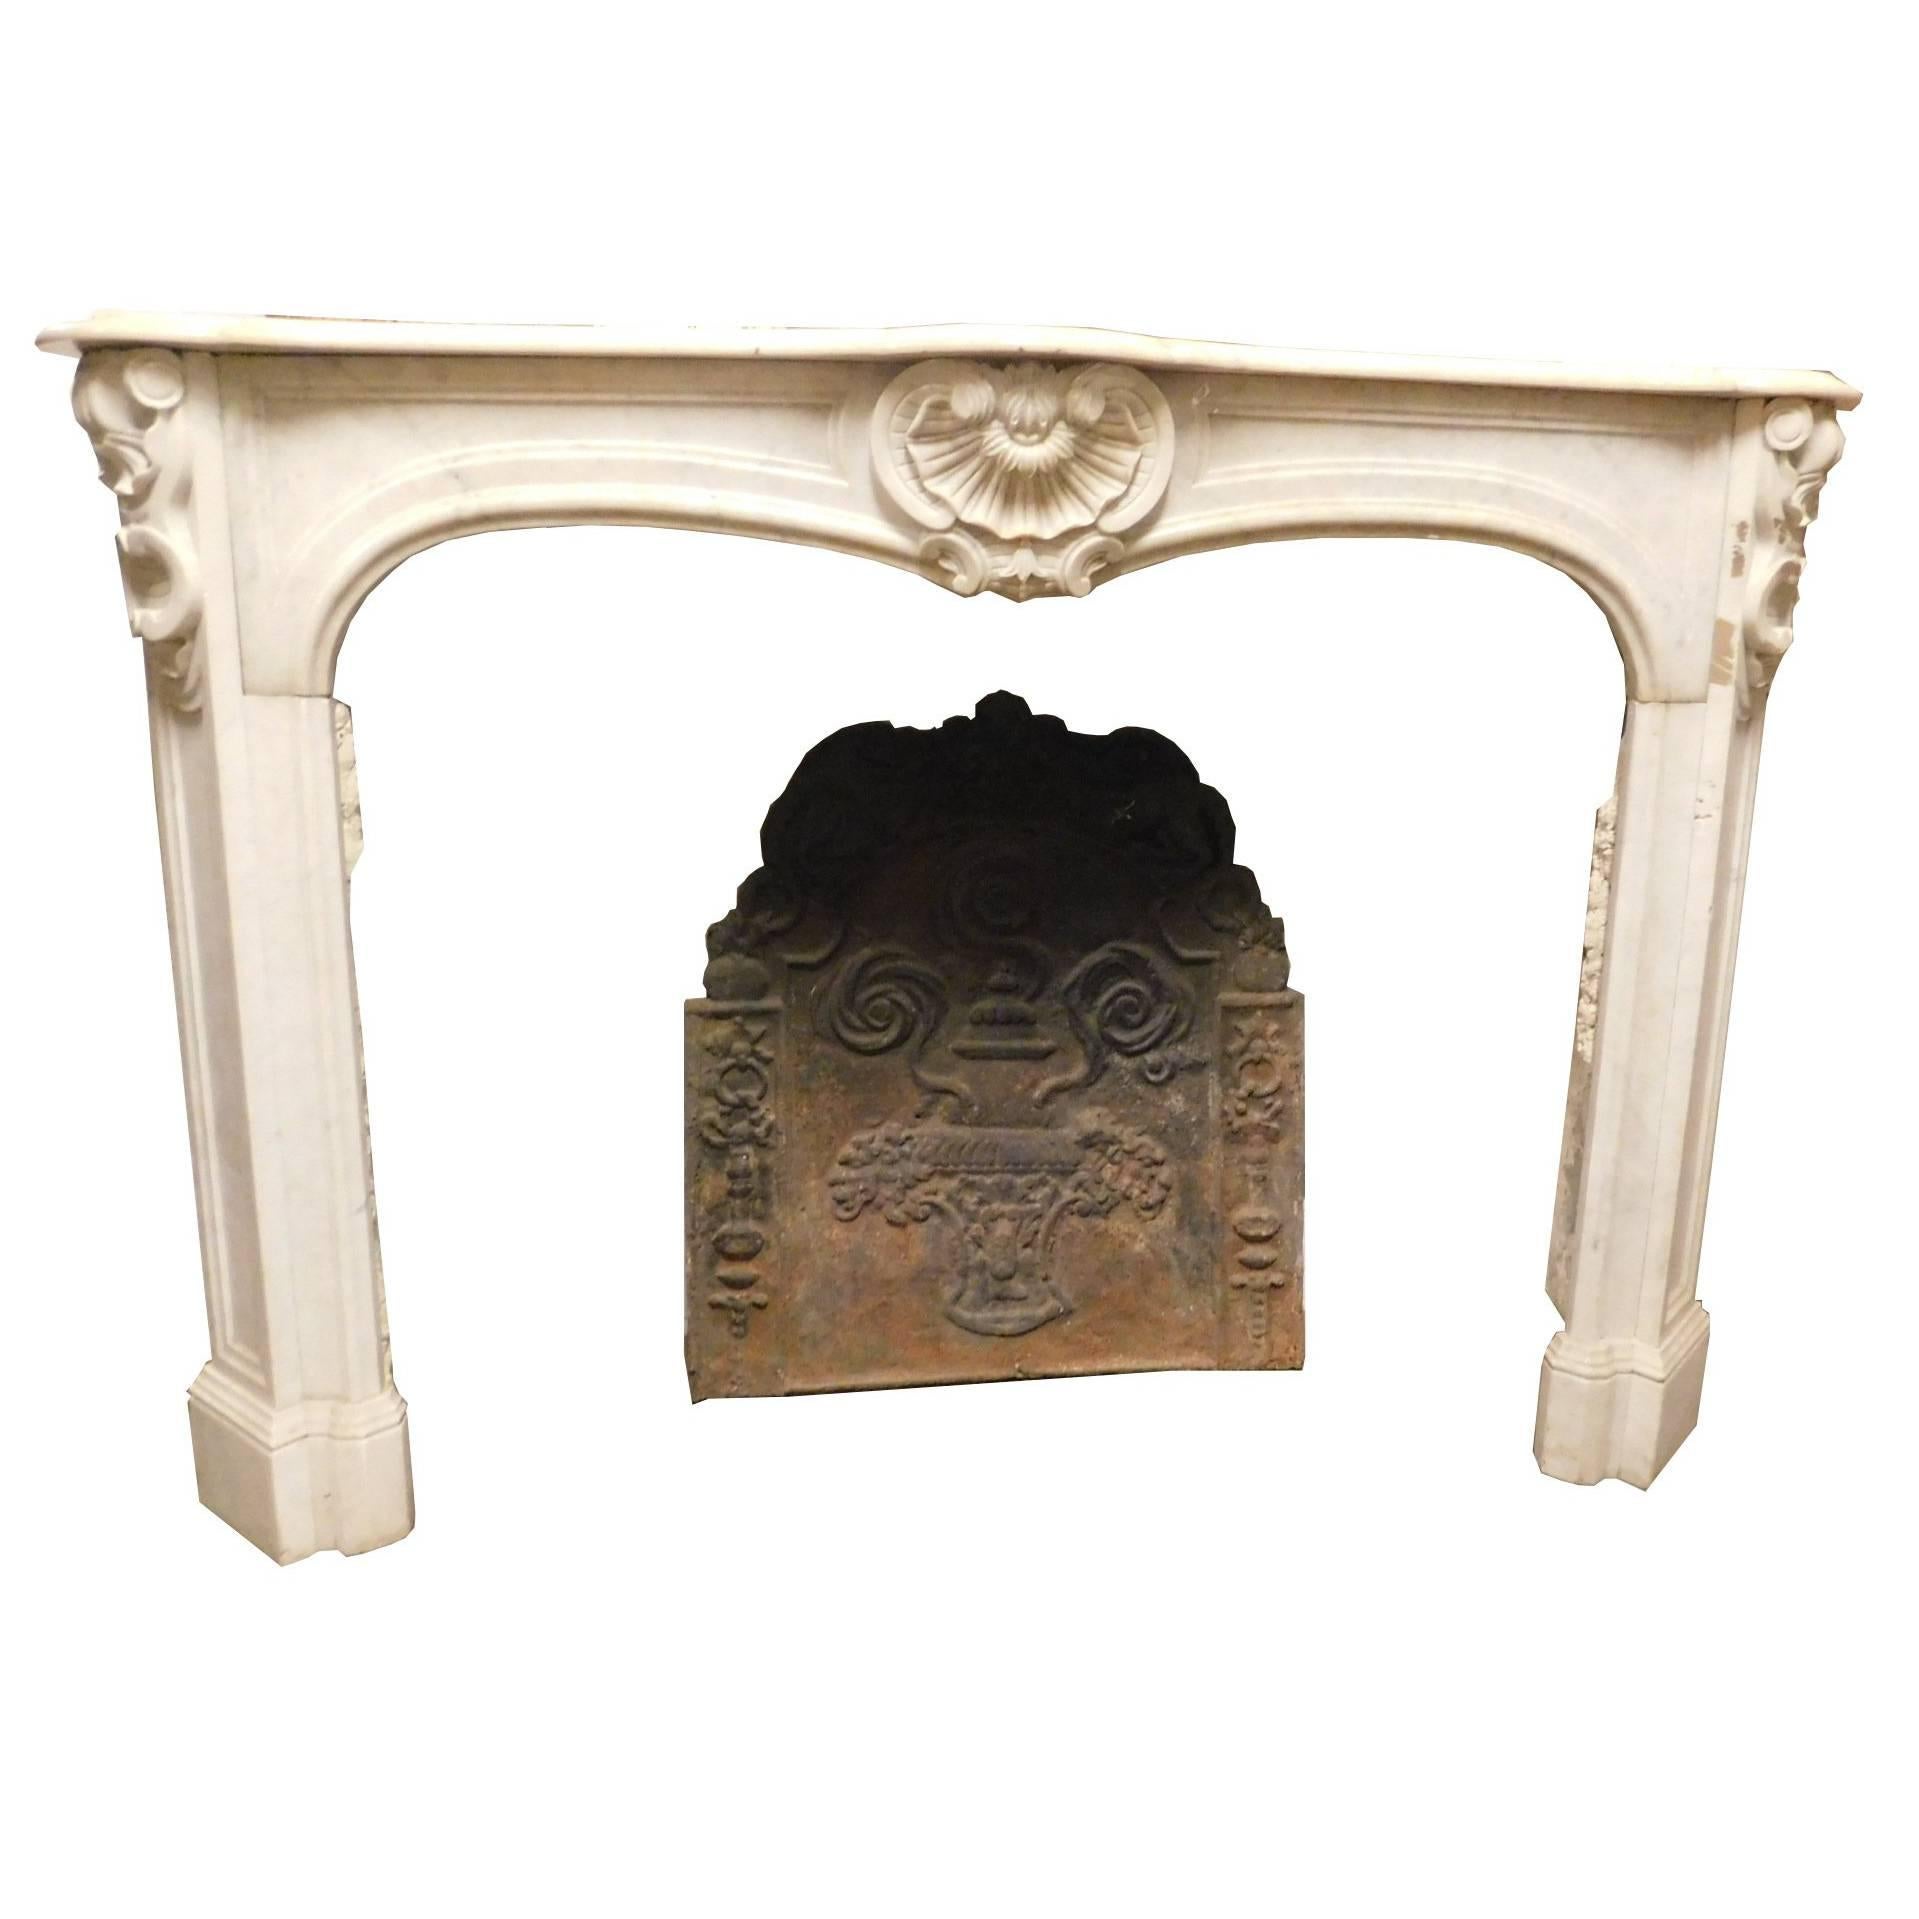 Antique Fireplace Mantel Made of Carrara's Marble